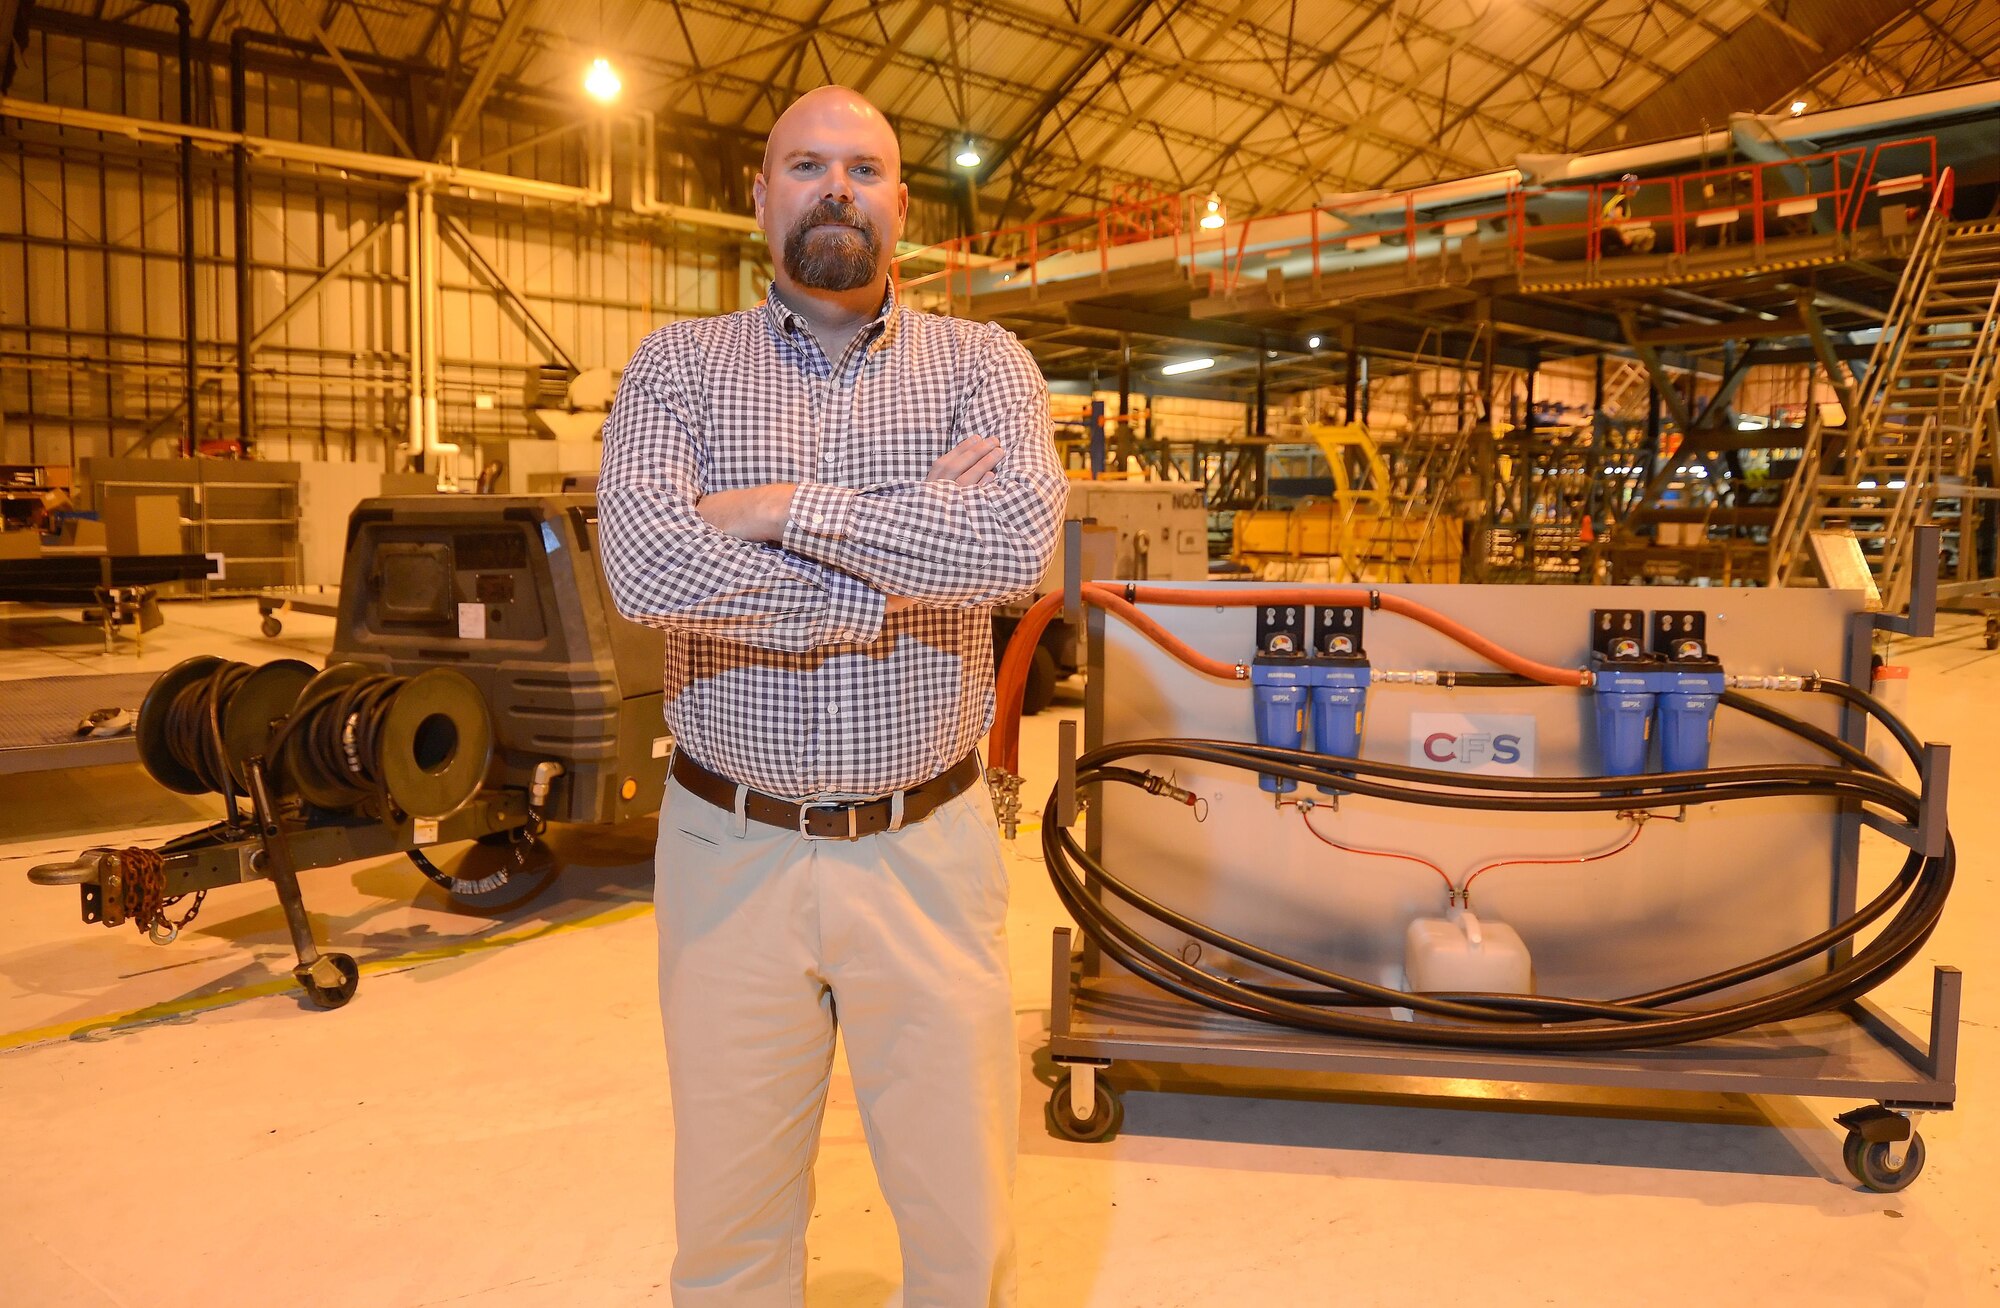 Retired Master Sgt. Michael Childers, the 436th Maintenance Squadron production supervisor, poses inside the isochronal maintenance hangar at Dover Air Force Base, Del. The MC-7 high-volume, low-pressure air cart is shown on the left while the filtration system Childers created is shown on the right. (U.S. Air Force photo/Greg L. Davis)